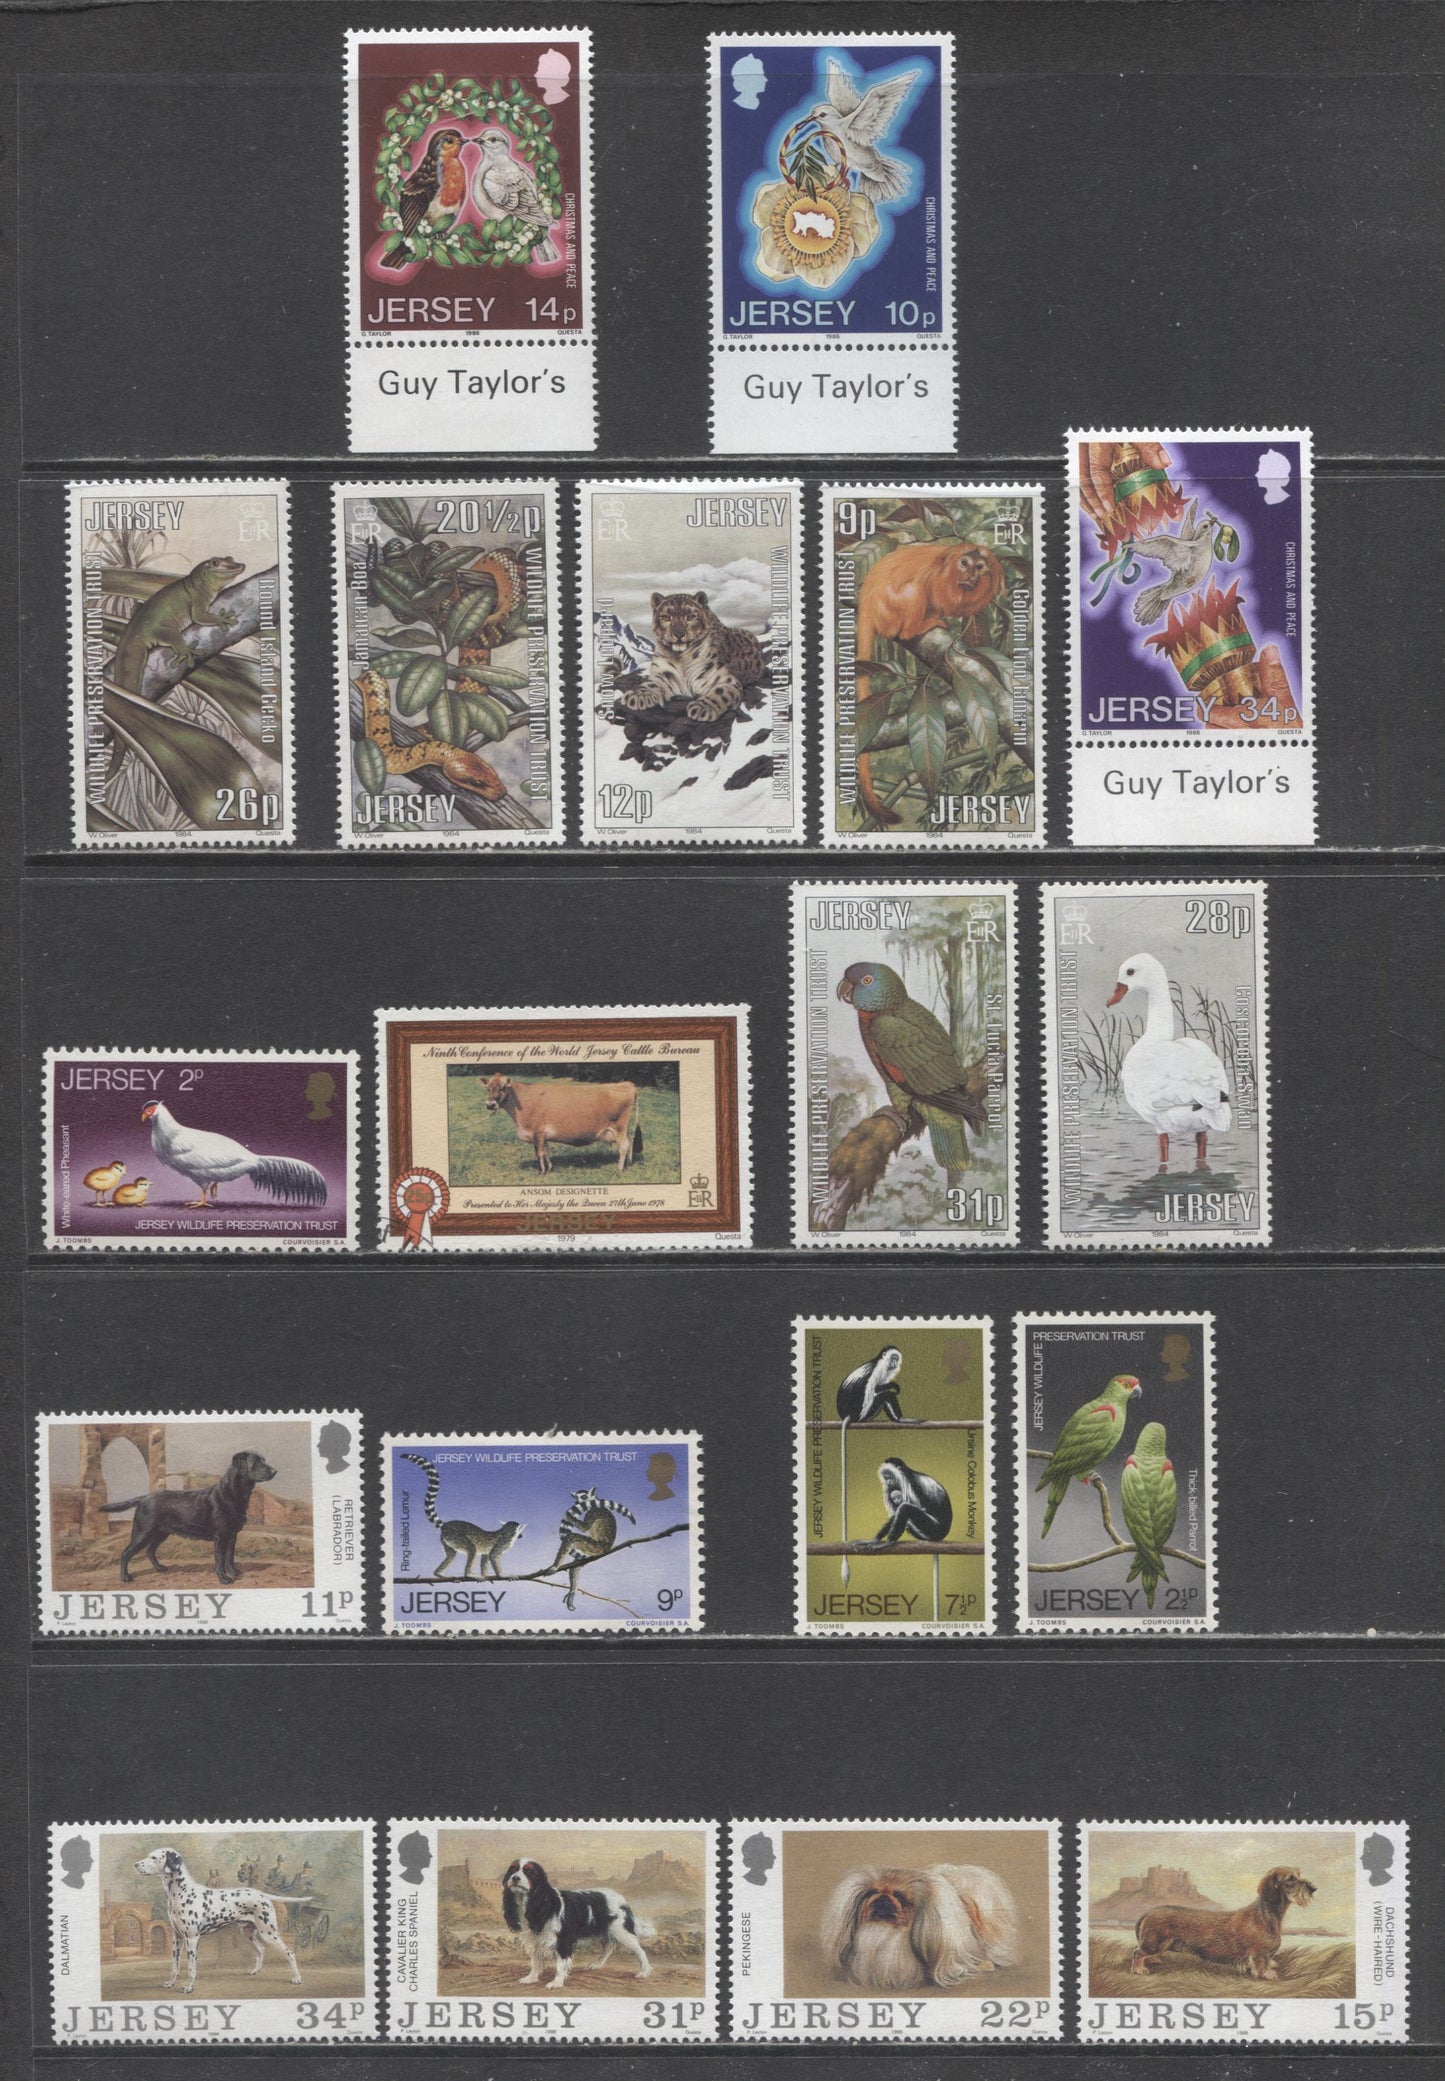 Lot 35 Great Britain - Jersey SC#49/451 1971-1988 Wildlife, Cows, Peace Year & Dog Club Issues, 19 VFOG Singles, Click on Listing to See ALL Pictures, 2017 Scott Cat. $16.7